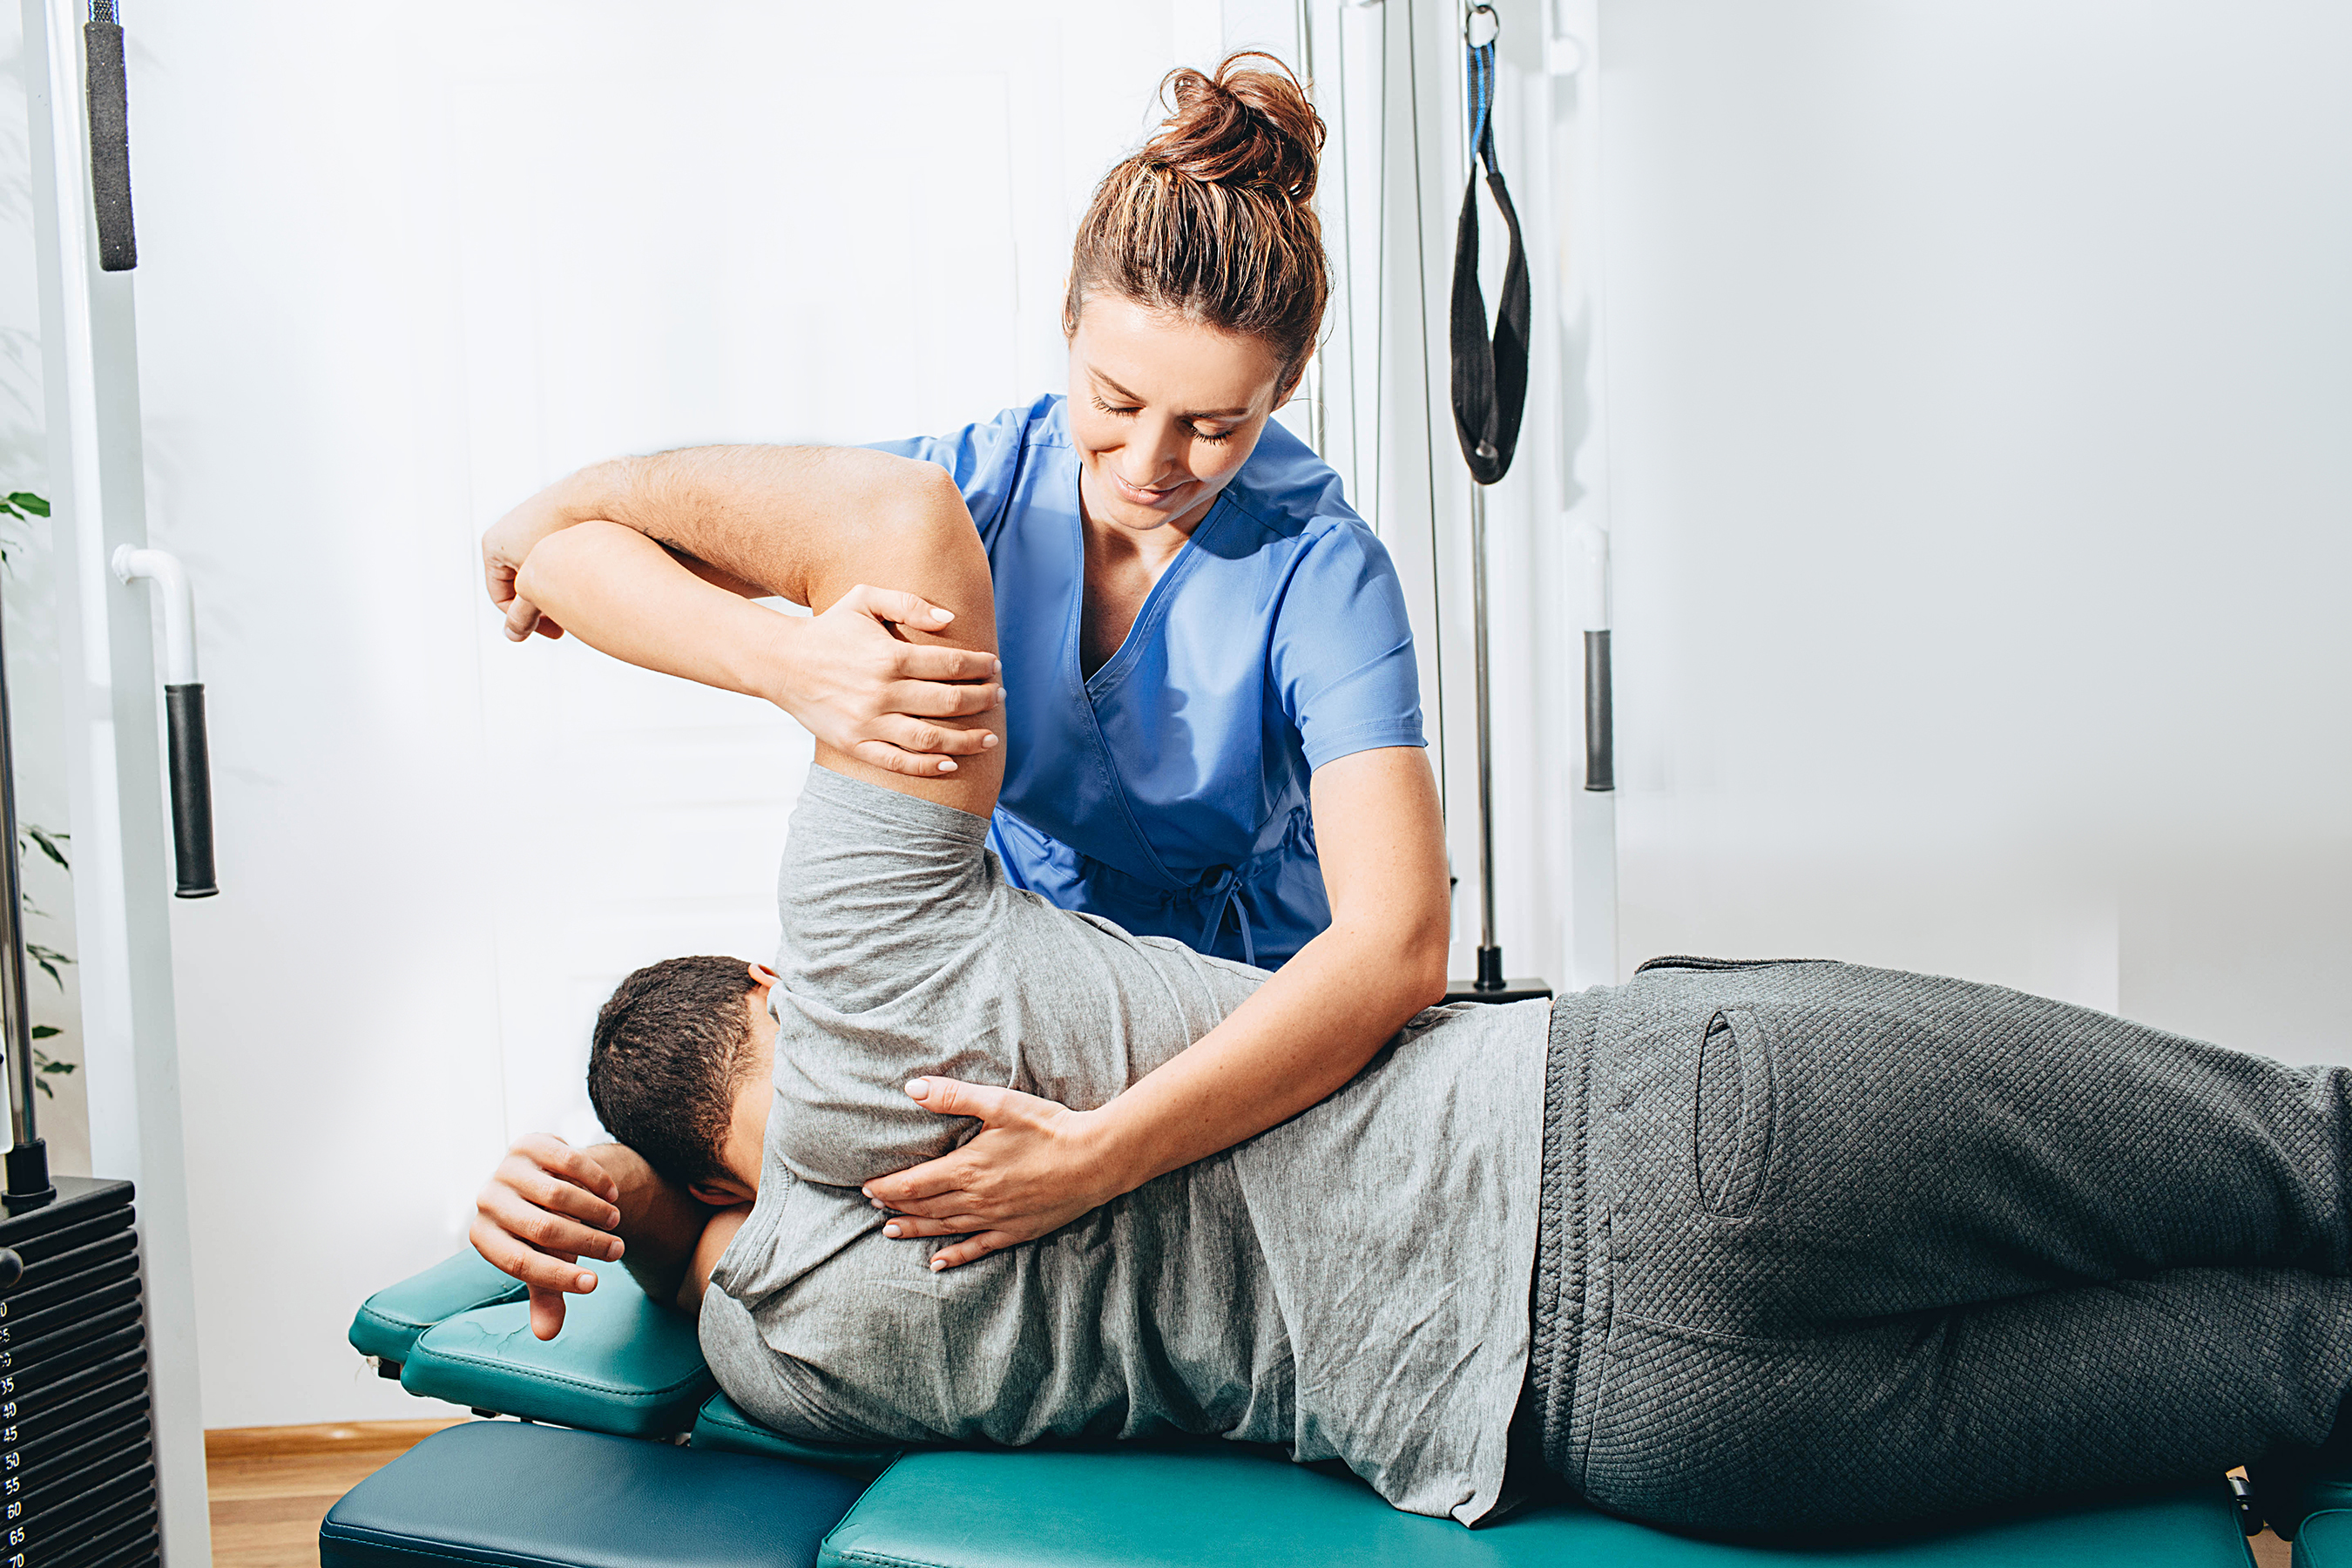 physical therapist works on patient's shoulder